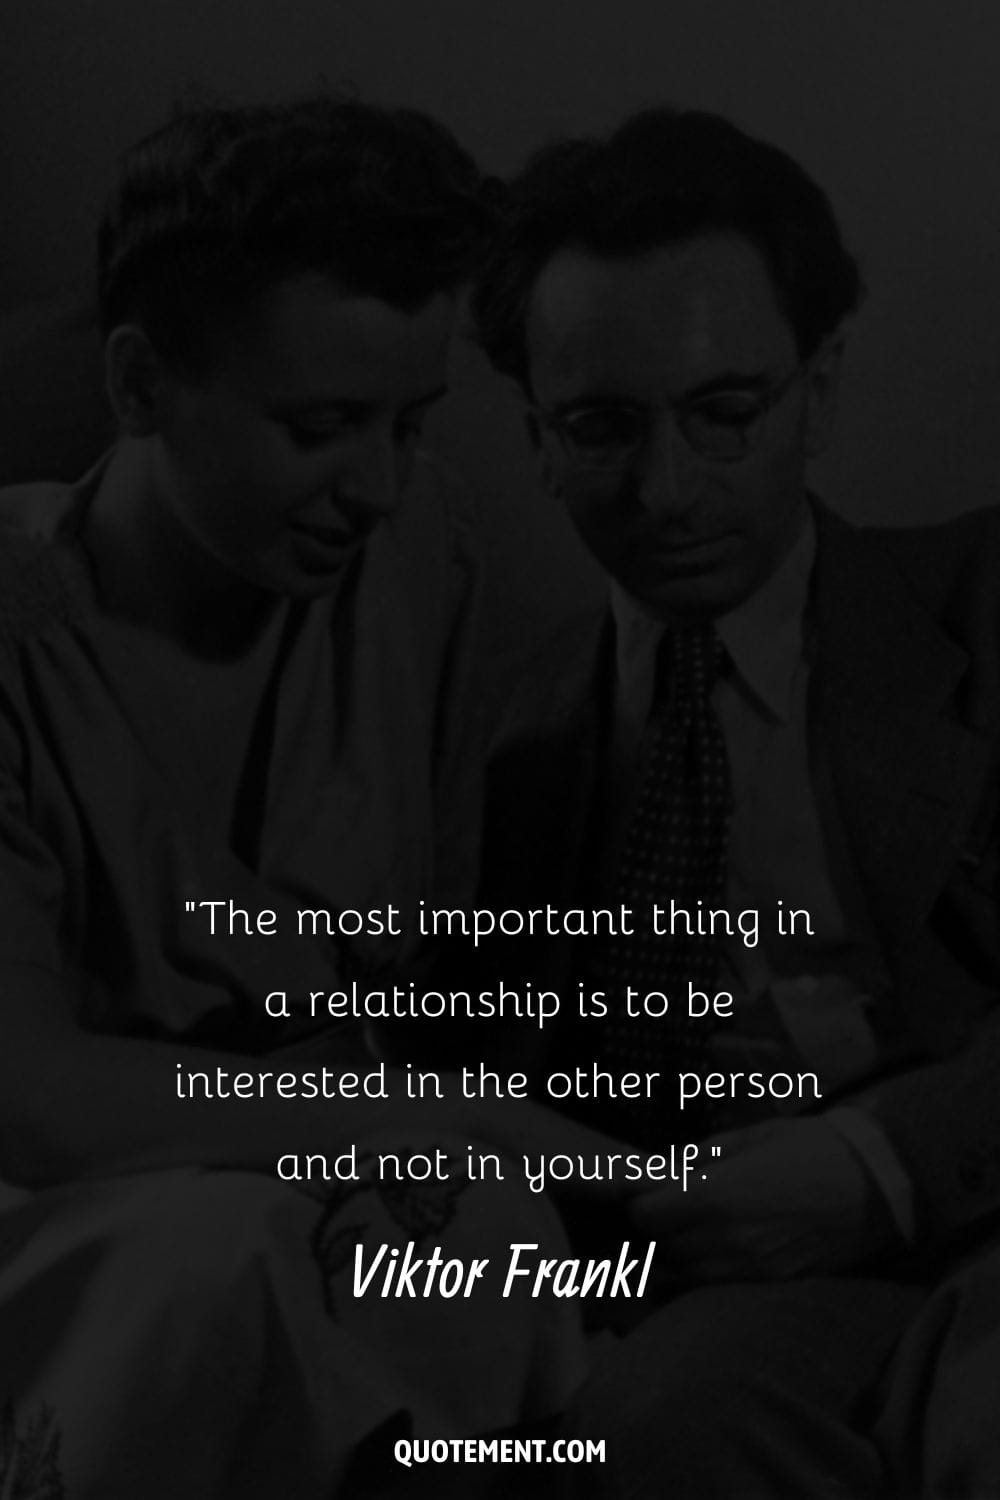 Image of Viktor Frankl with his wife representing his quote on relationships.